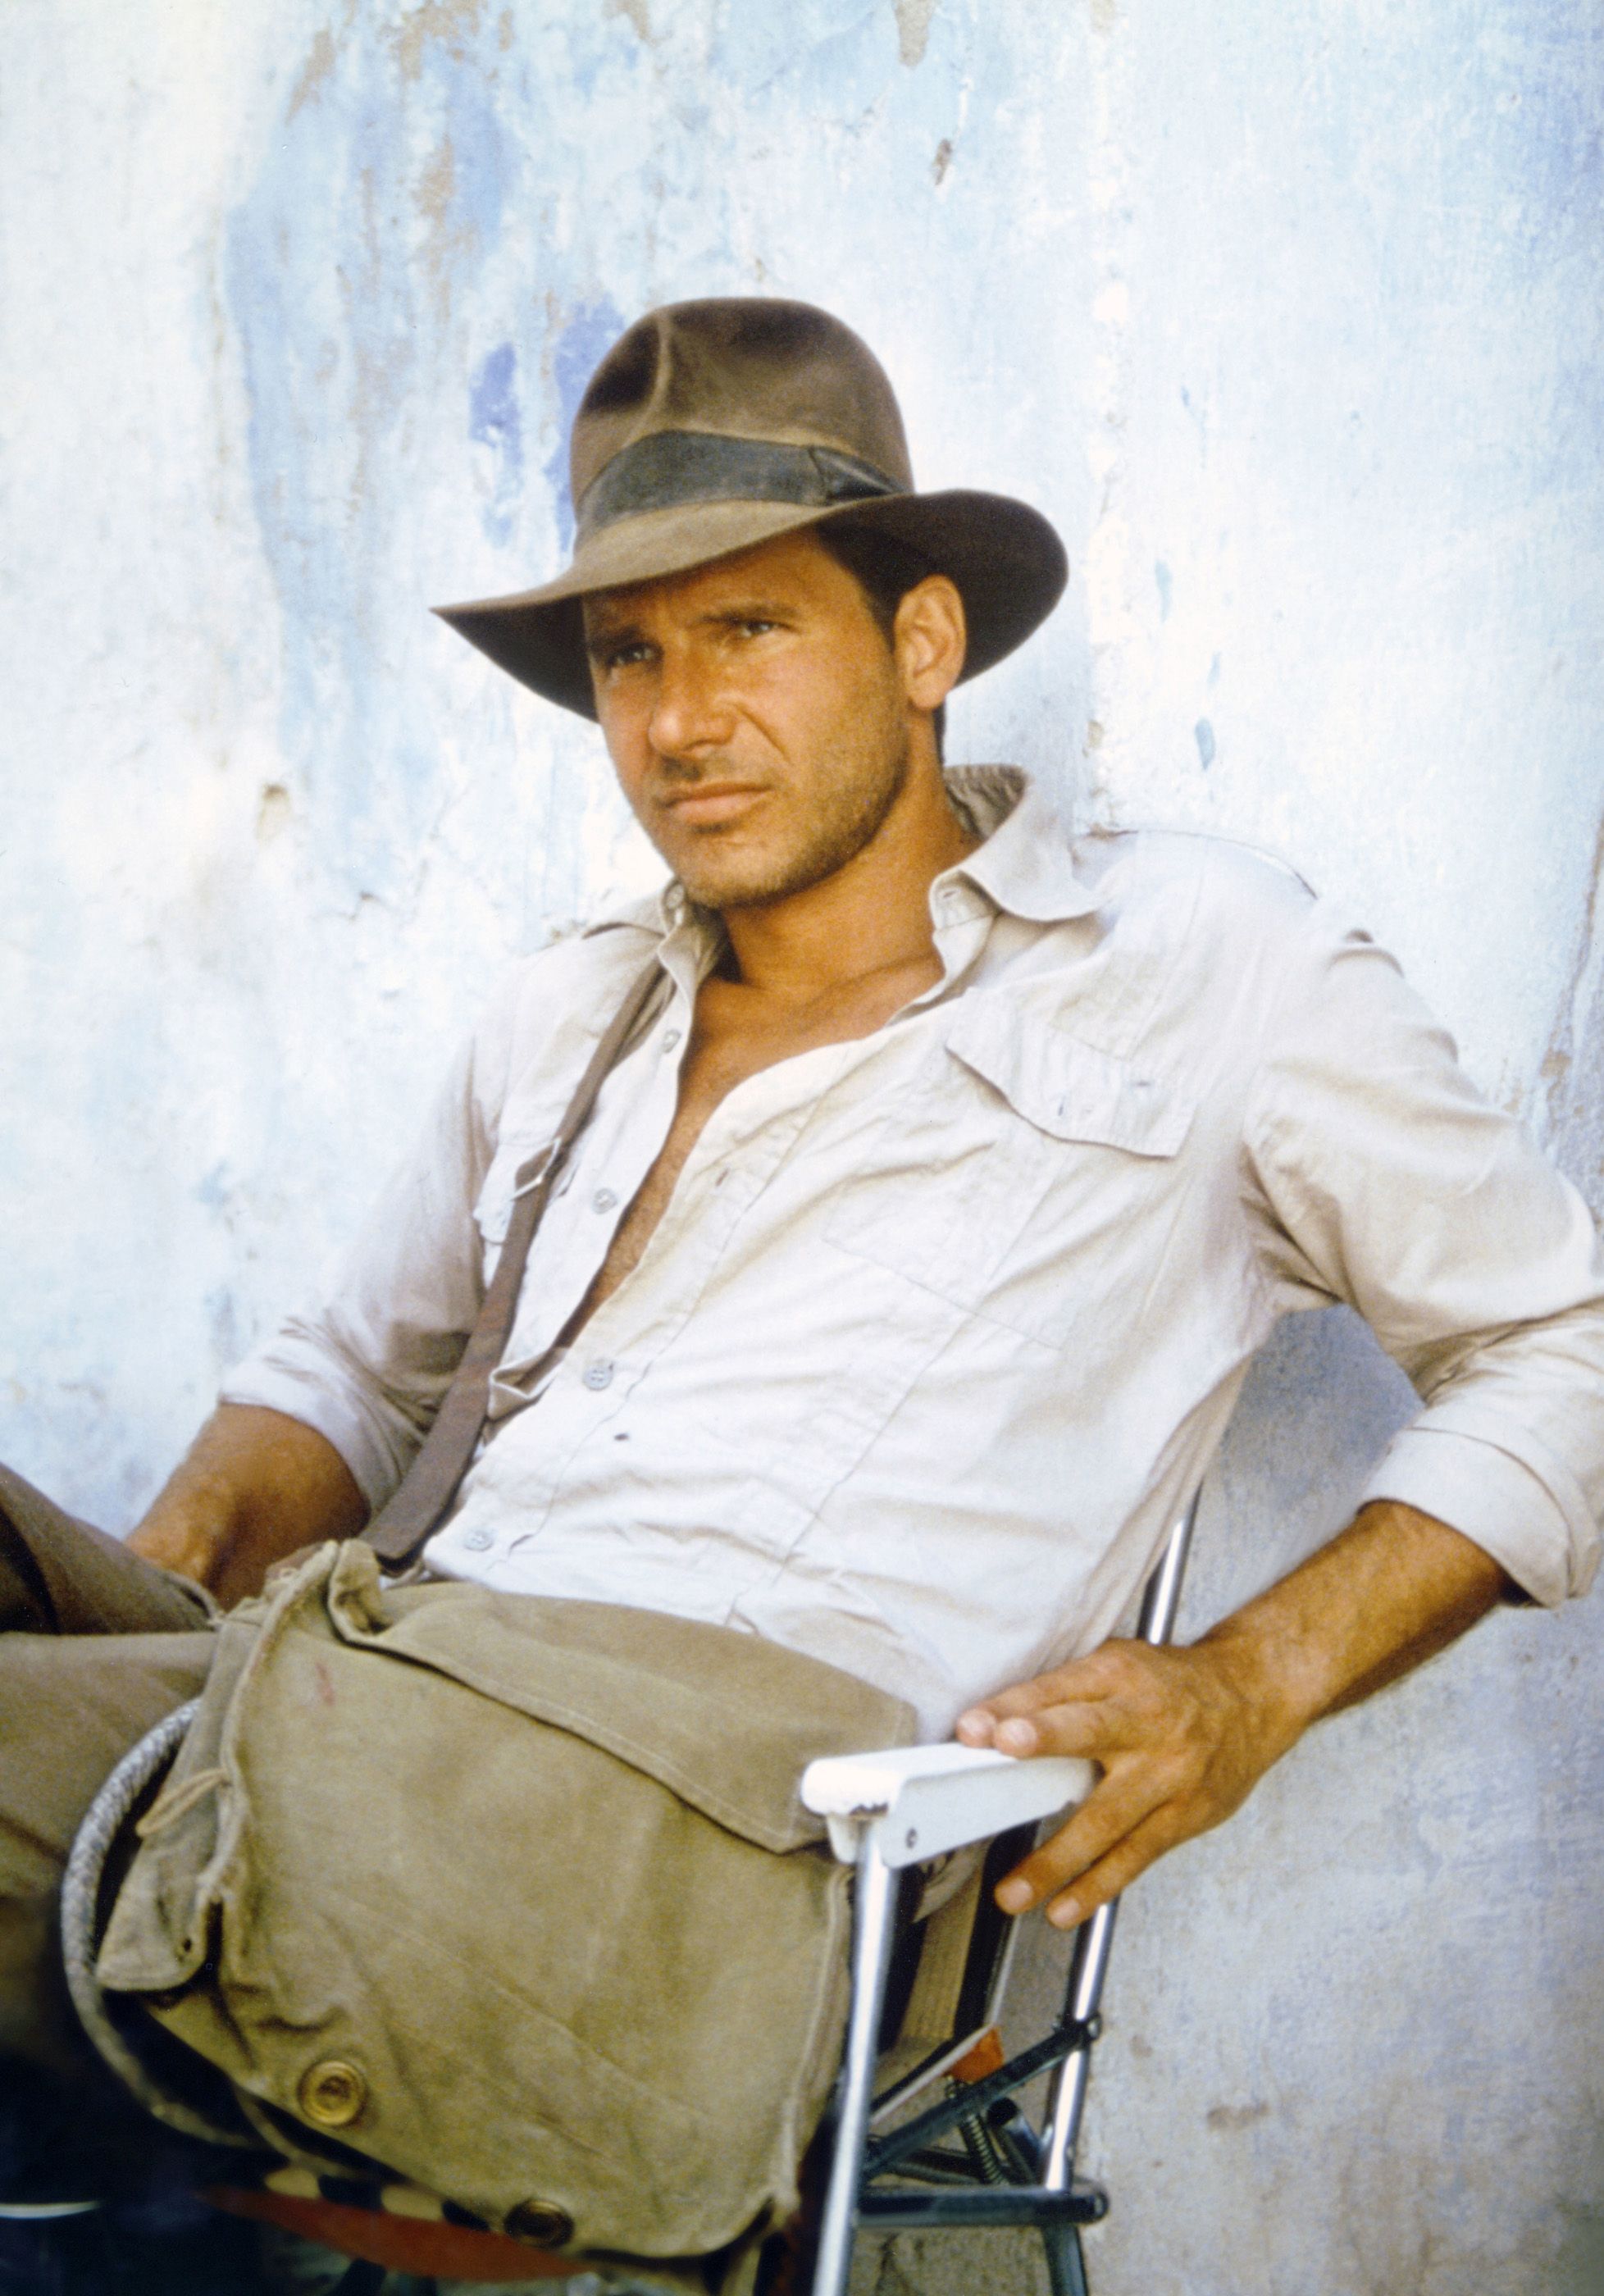 Behind-the-Scenes Photos From Indiana Jones' Raiders of the Lost Ark